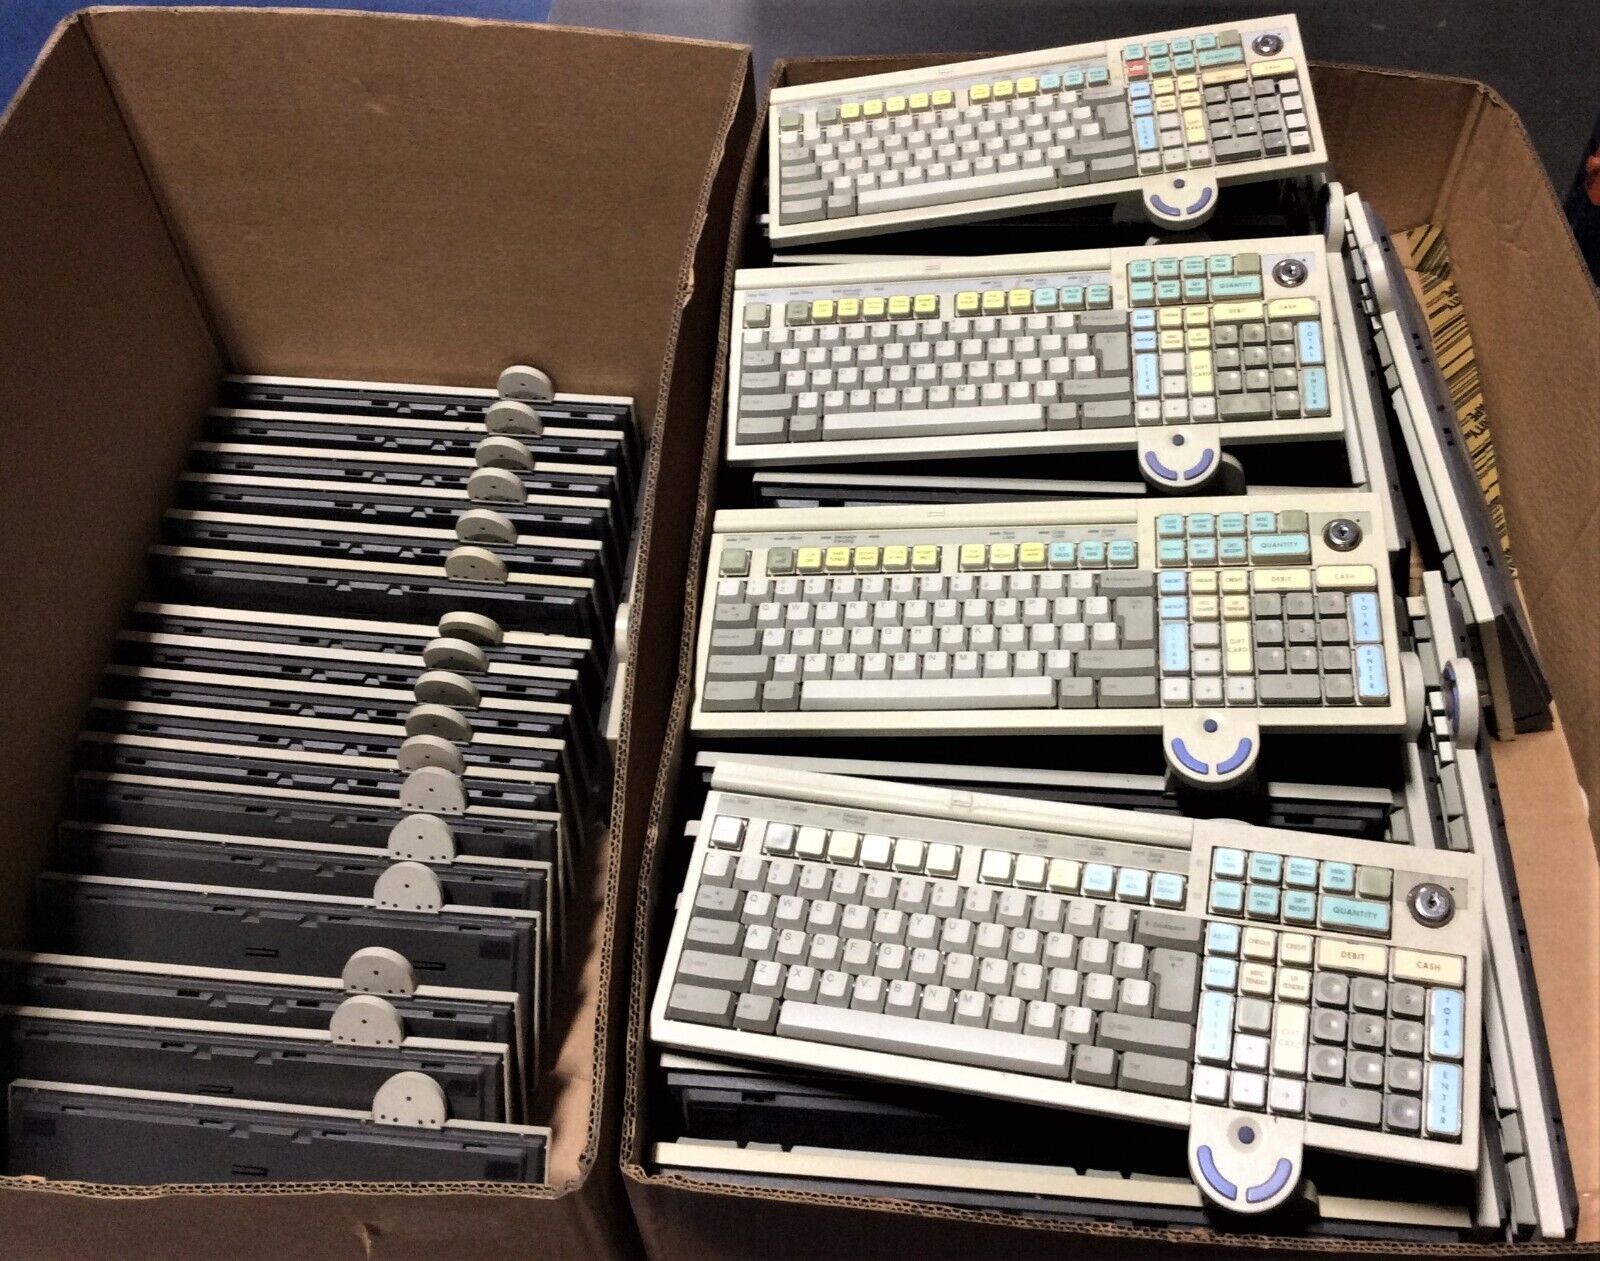 LOT OF 10 x IBM ANPOS POS Keyboard With Integrated Mouse FRU 13G2130 or 41K6950